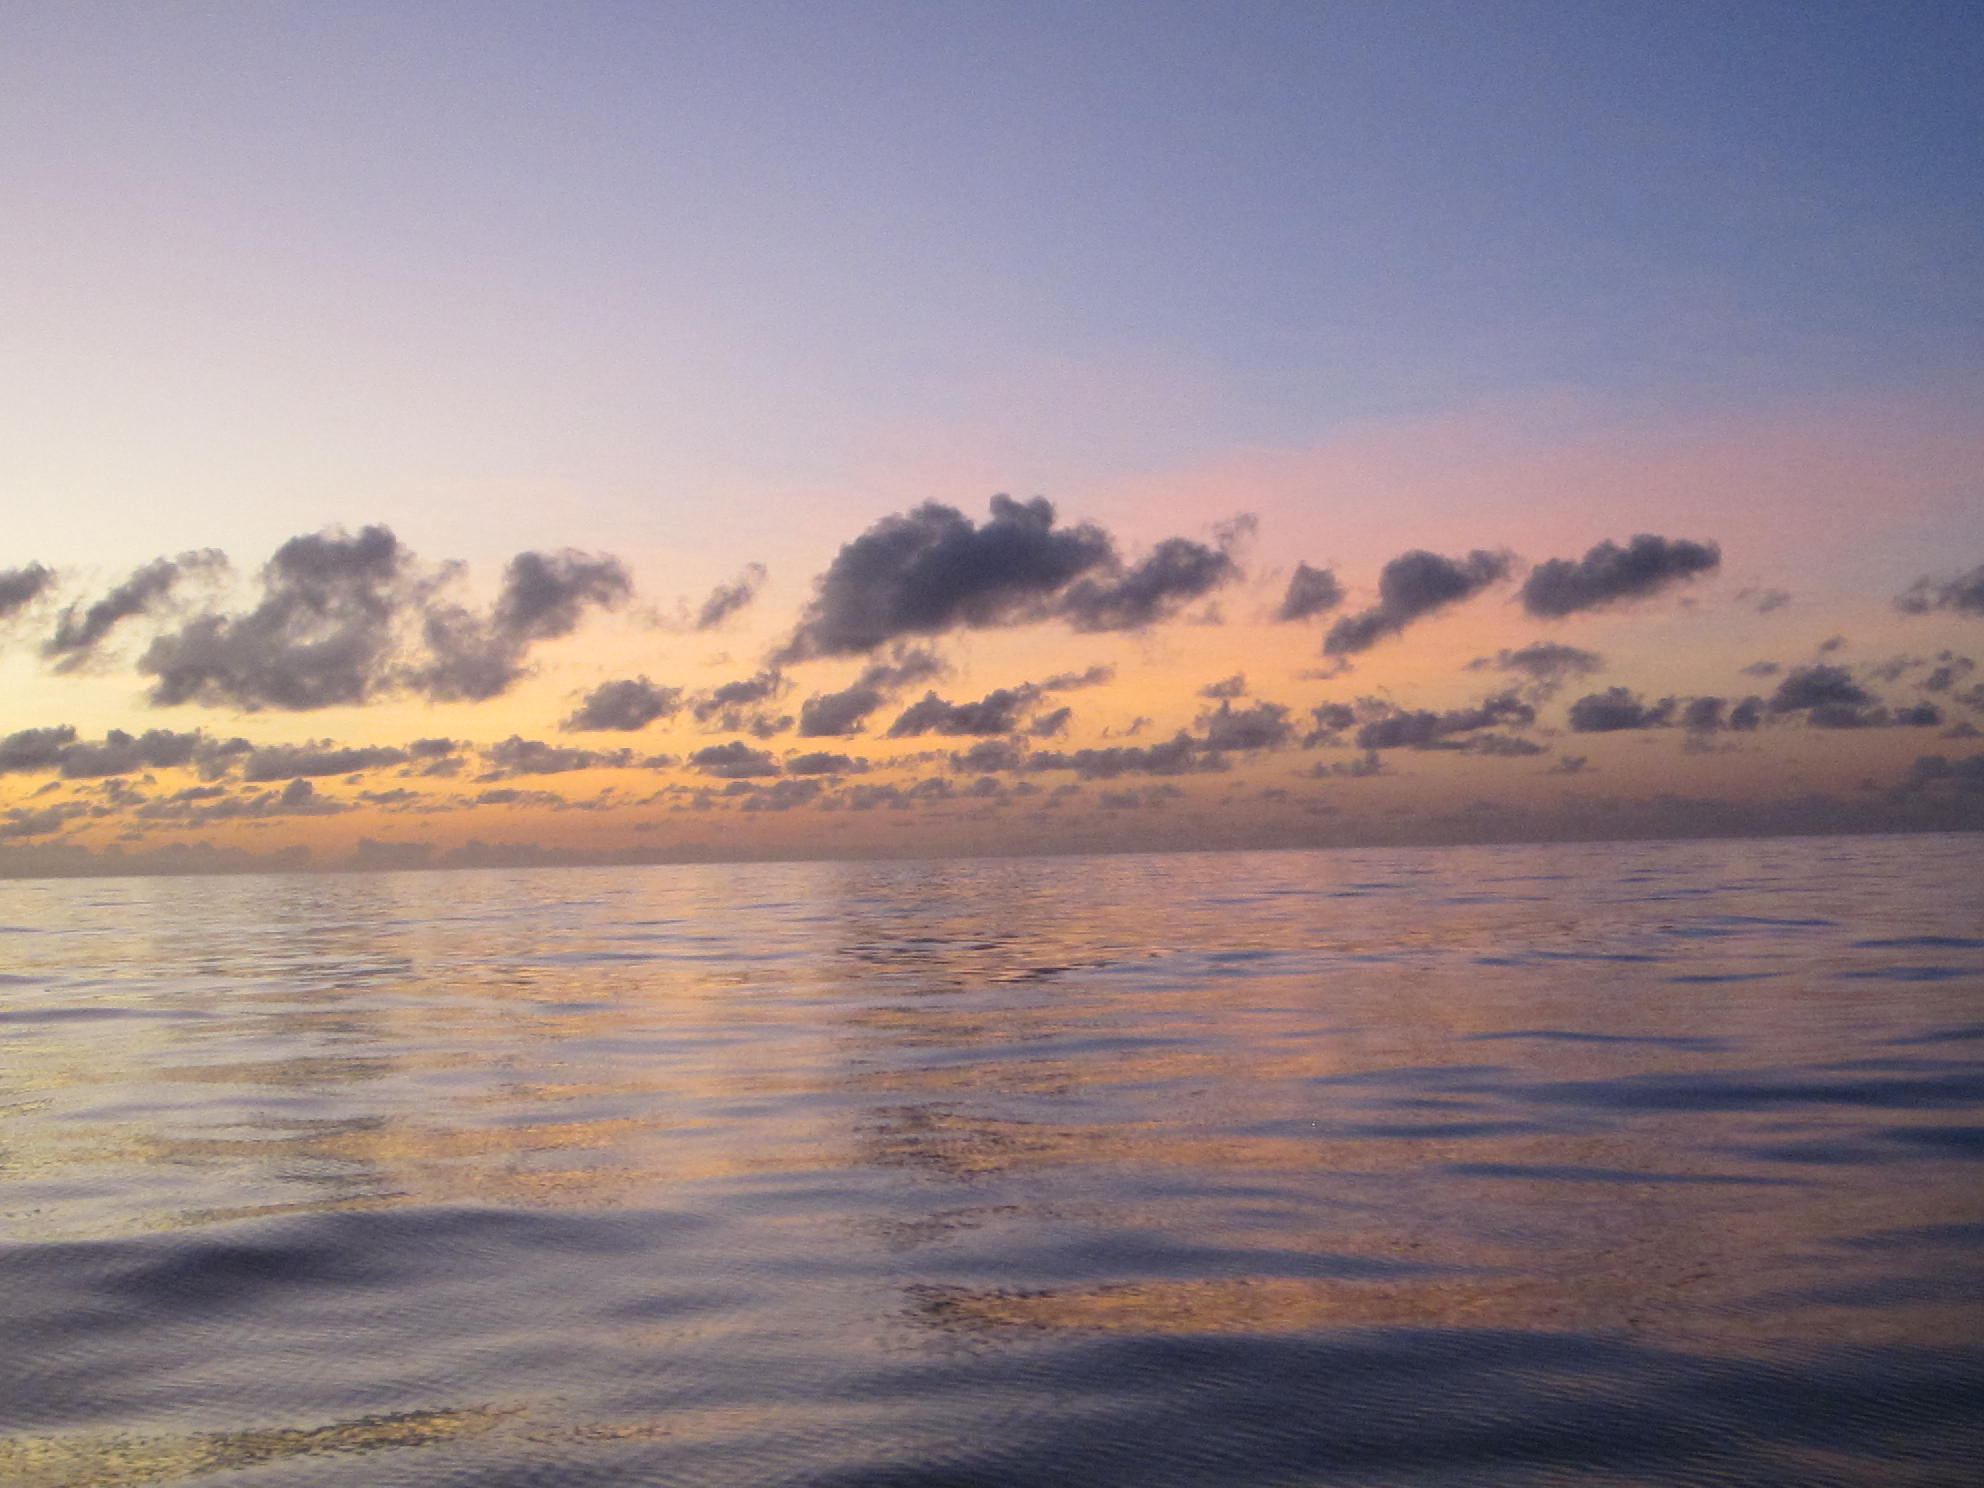 55-this-gorgeous-sunrise-approaching-the-great-barrier-reef-showed-how-the-ocean-can-sometimes-be-as-calm-as-a-pond